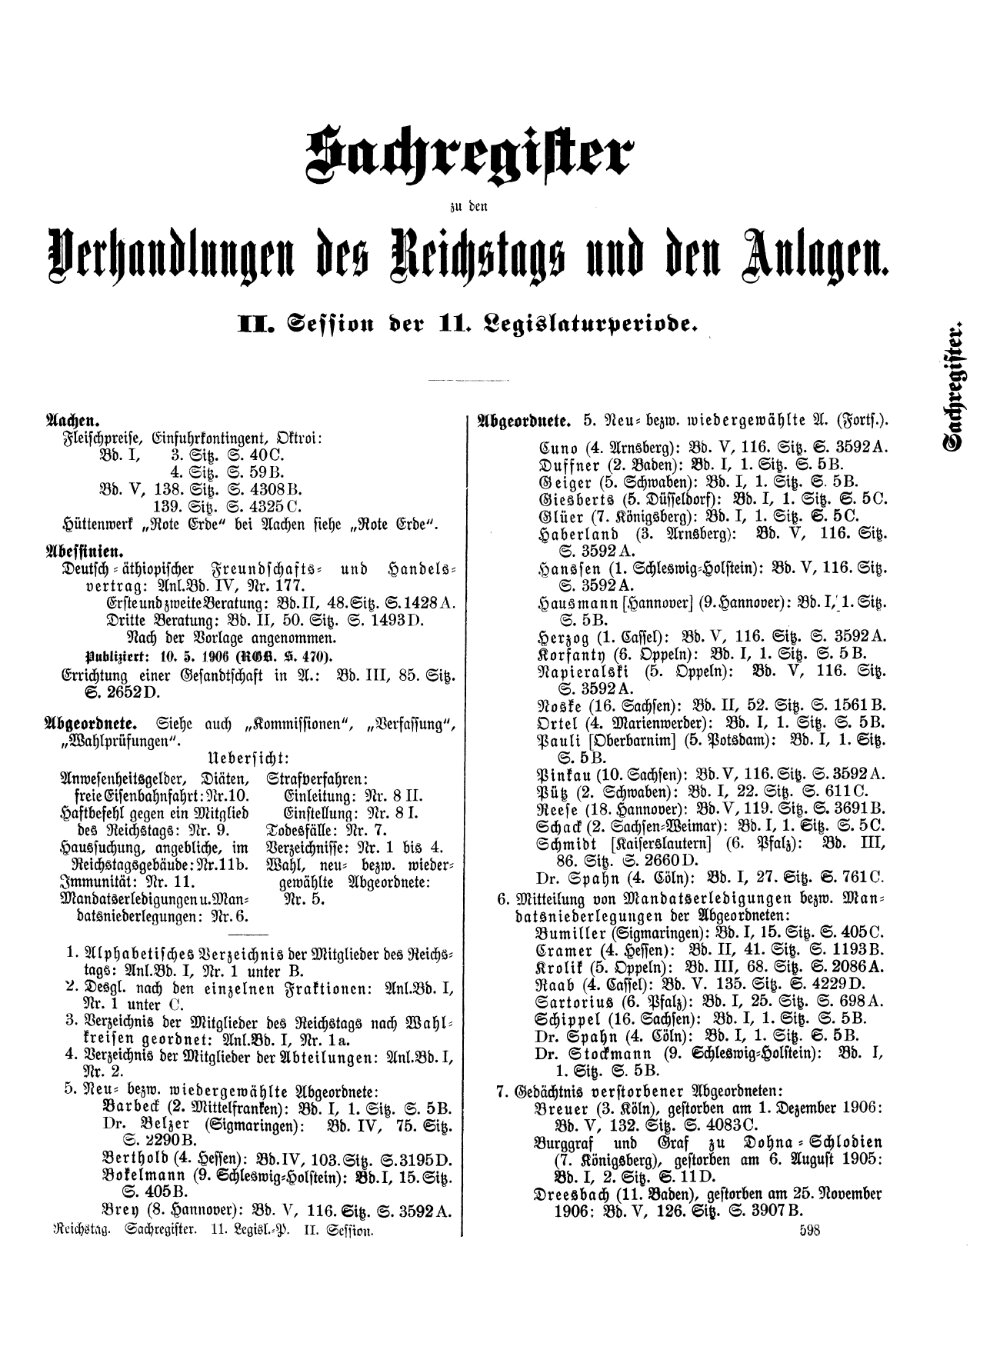 Scan of page 4387